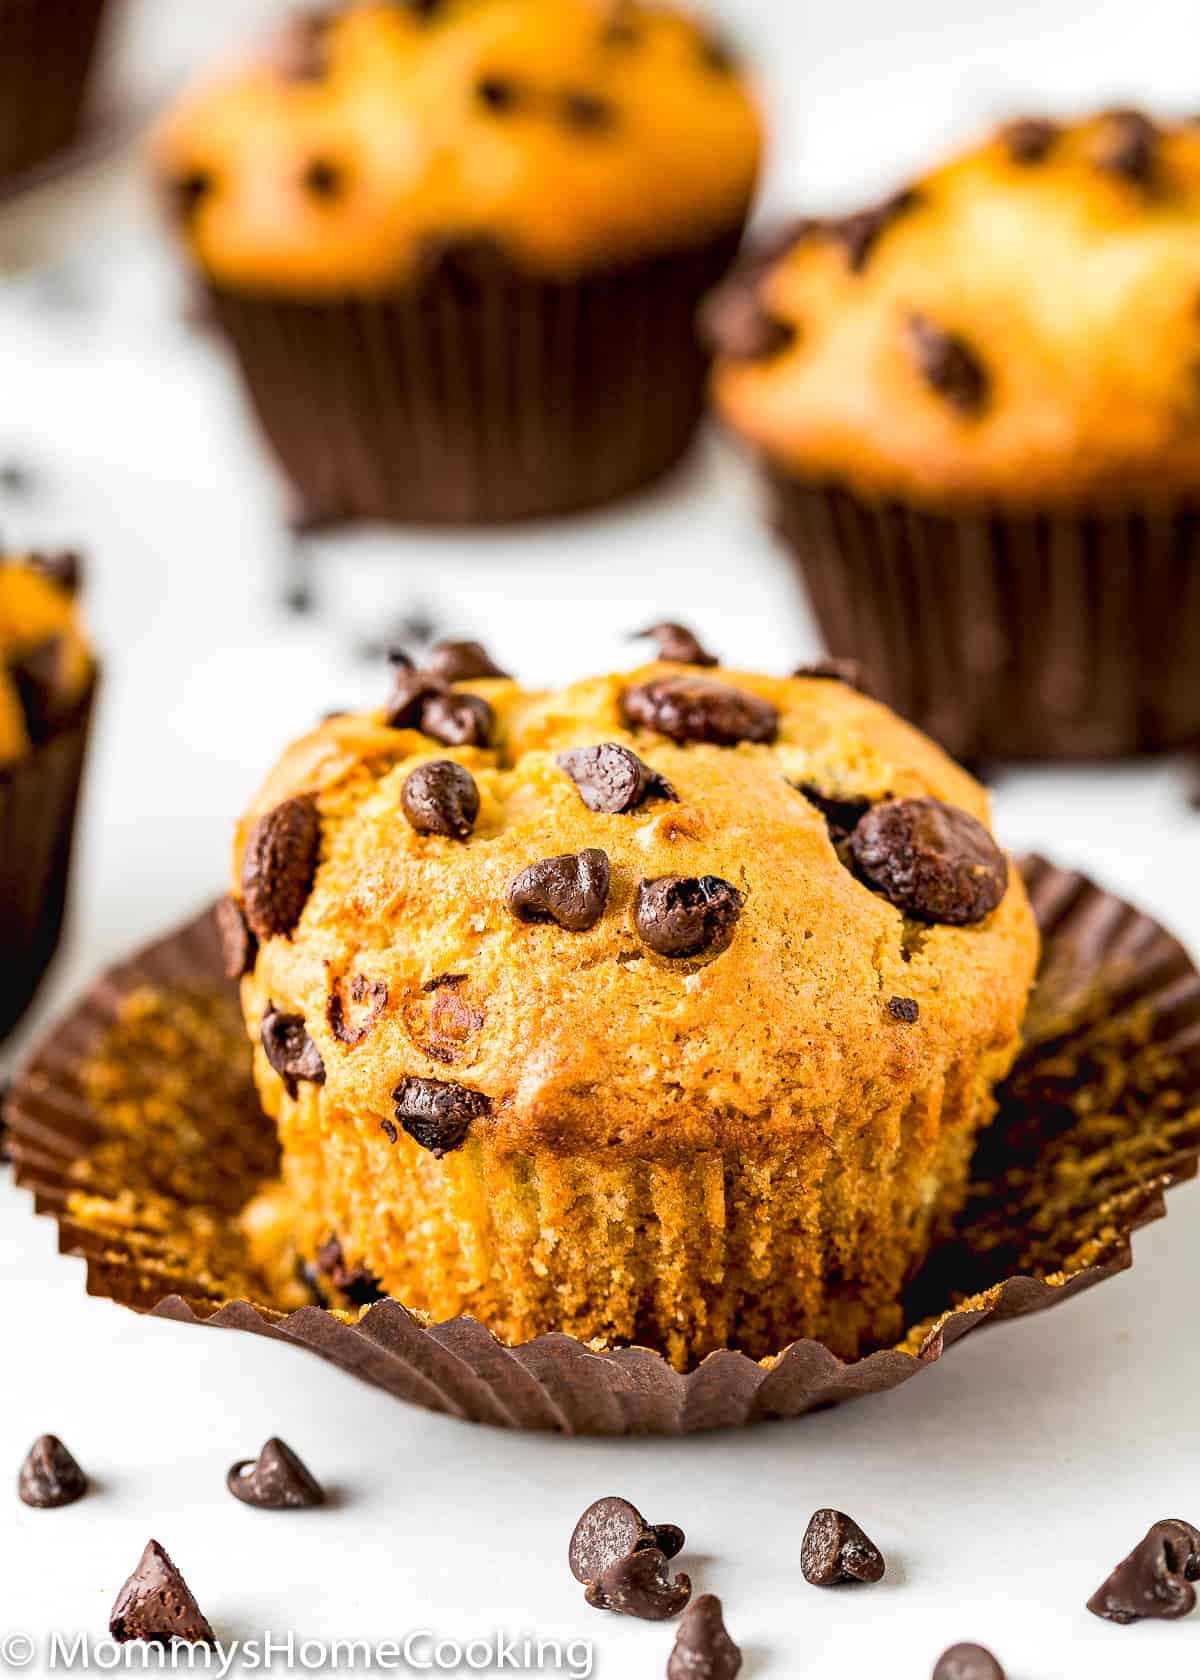 one Eggless Banana Chocolate Chip Muffin showing exterior texture.